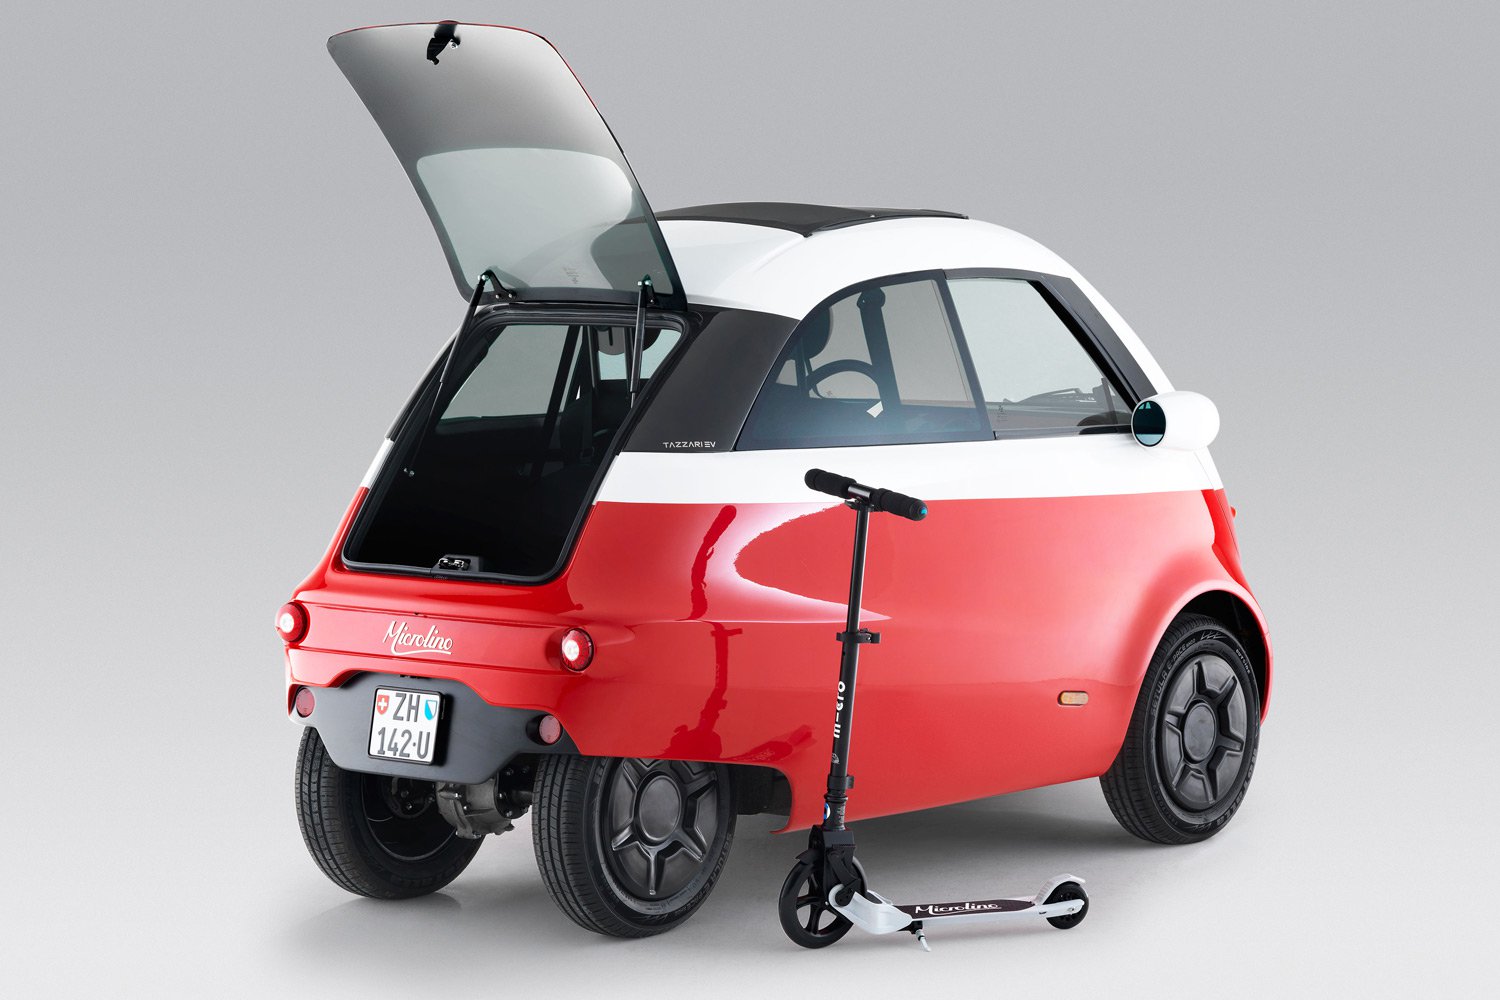 Microlino: Probably the Most Compact Vehicle on the Streets